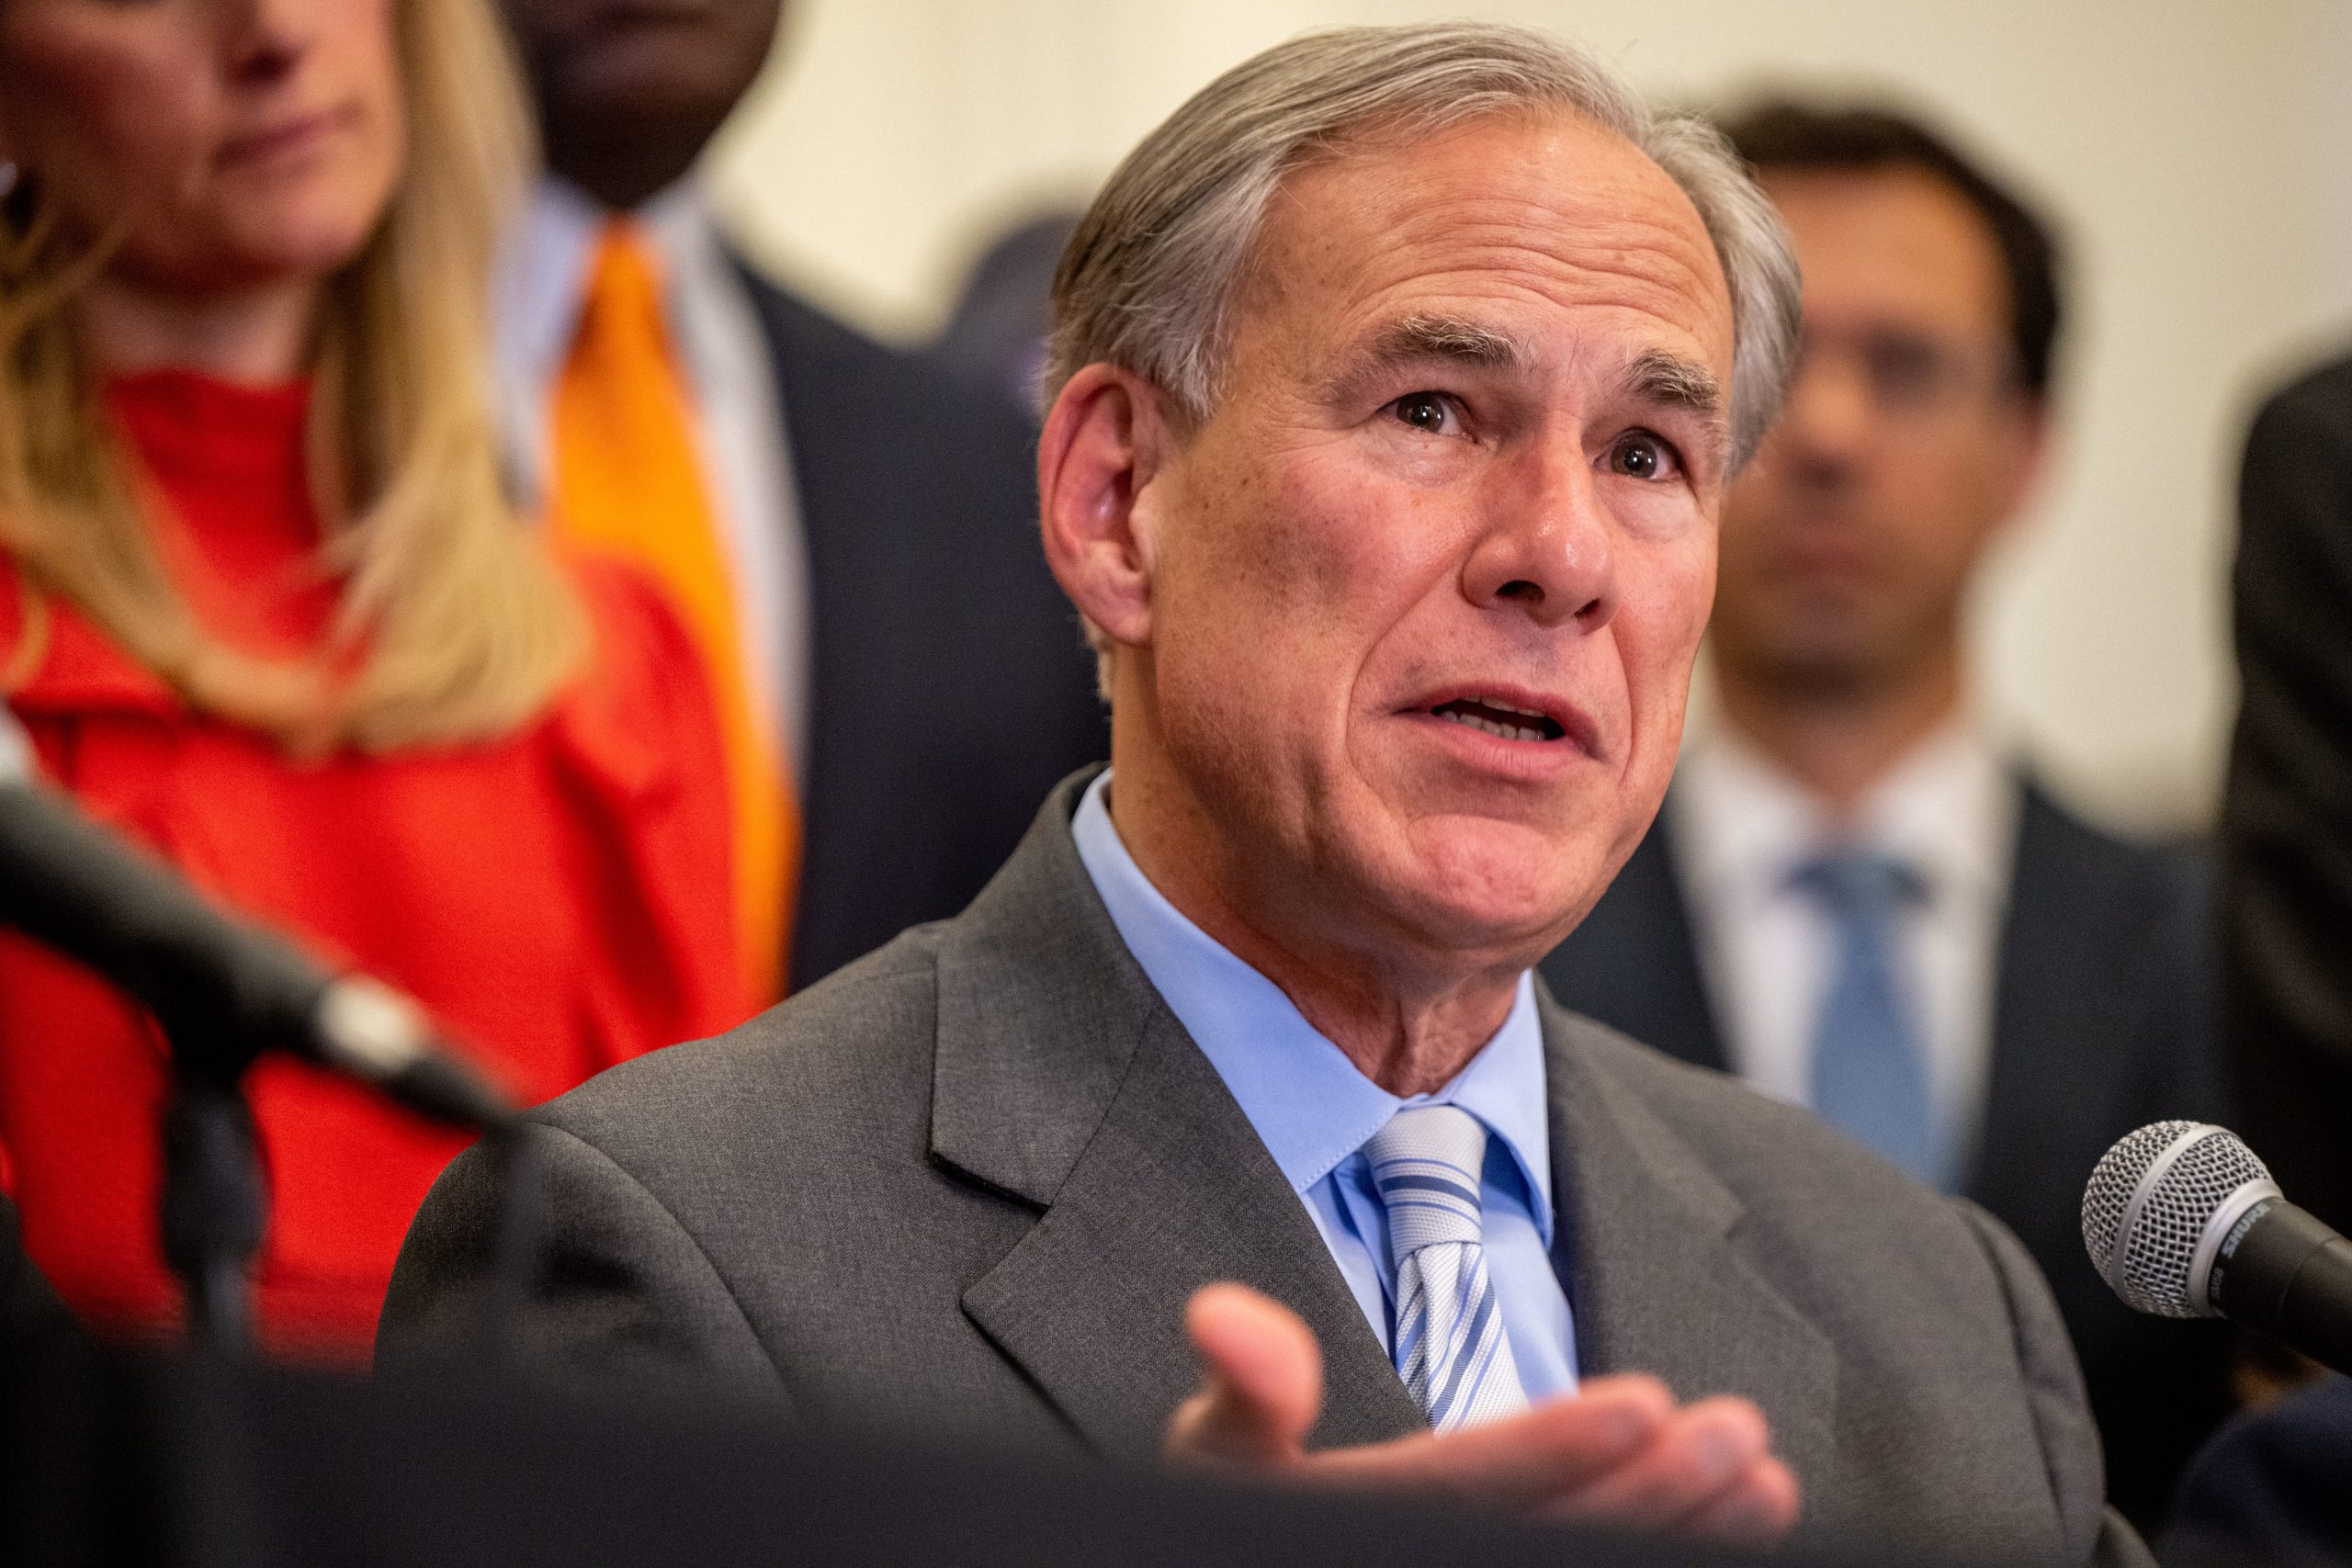 Governor Abbott activates state emergency response [Video]